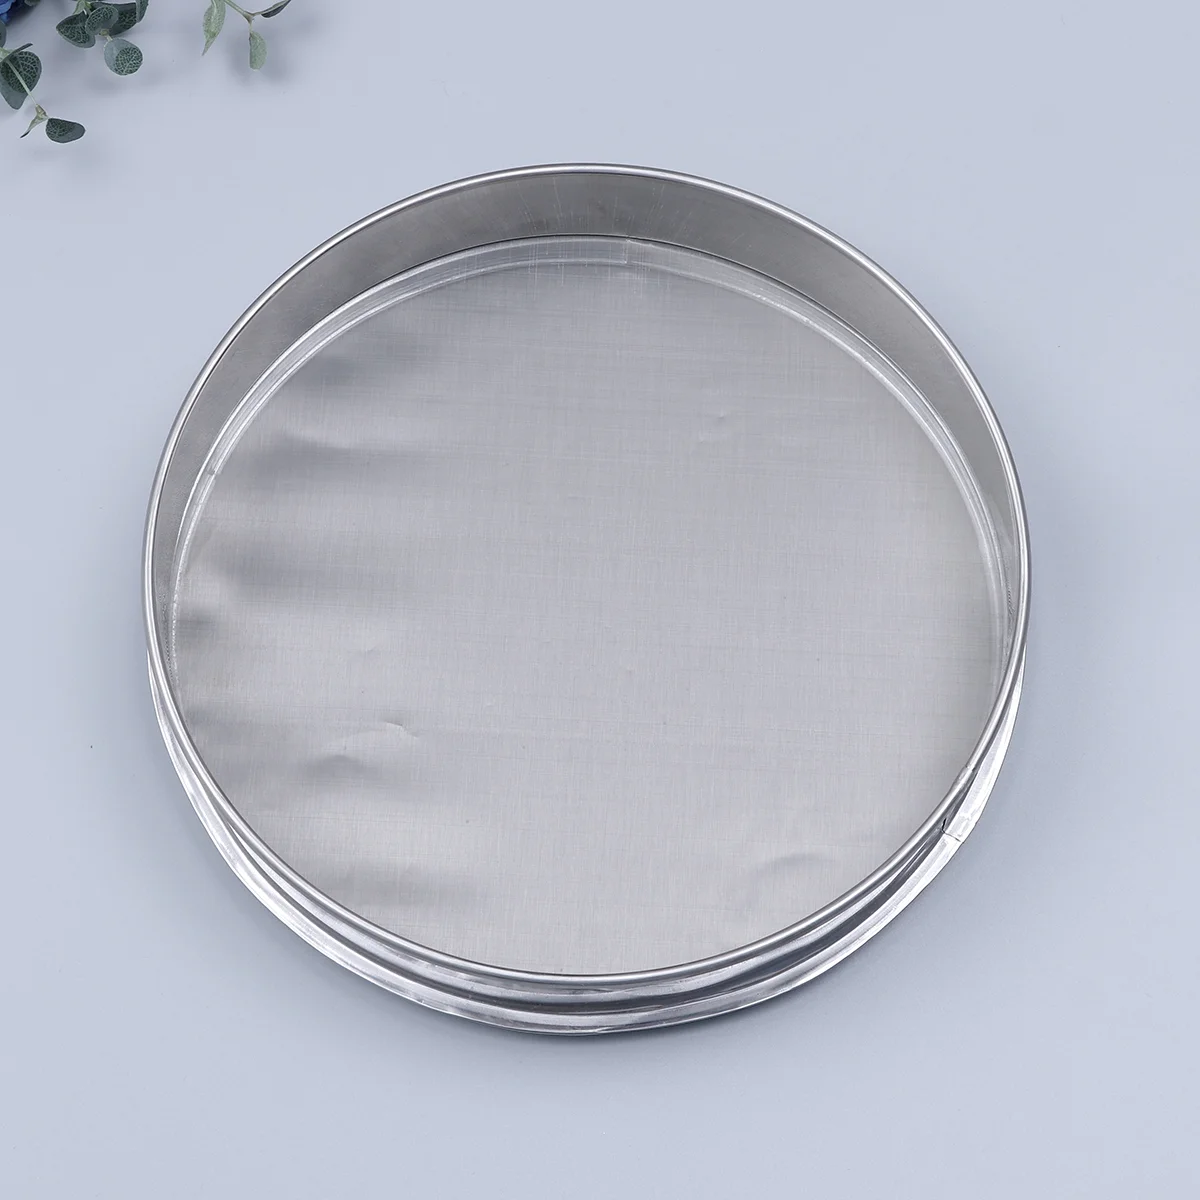 

Sifter Flour Sieve Mesh Fine Baking Pollen Strainer Round Herbal Steel Stainless Kitchen Shaker Extractor Sifting Cup Handheld